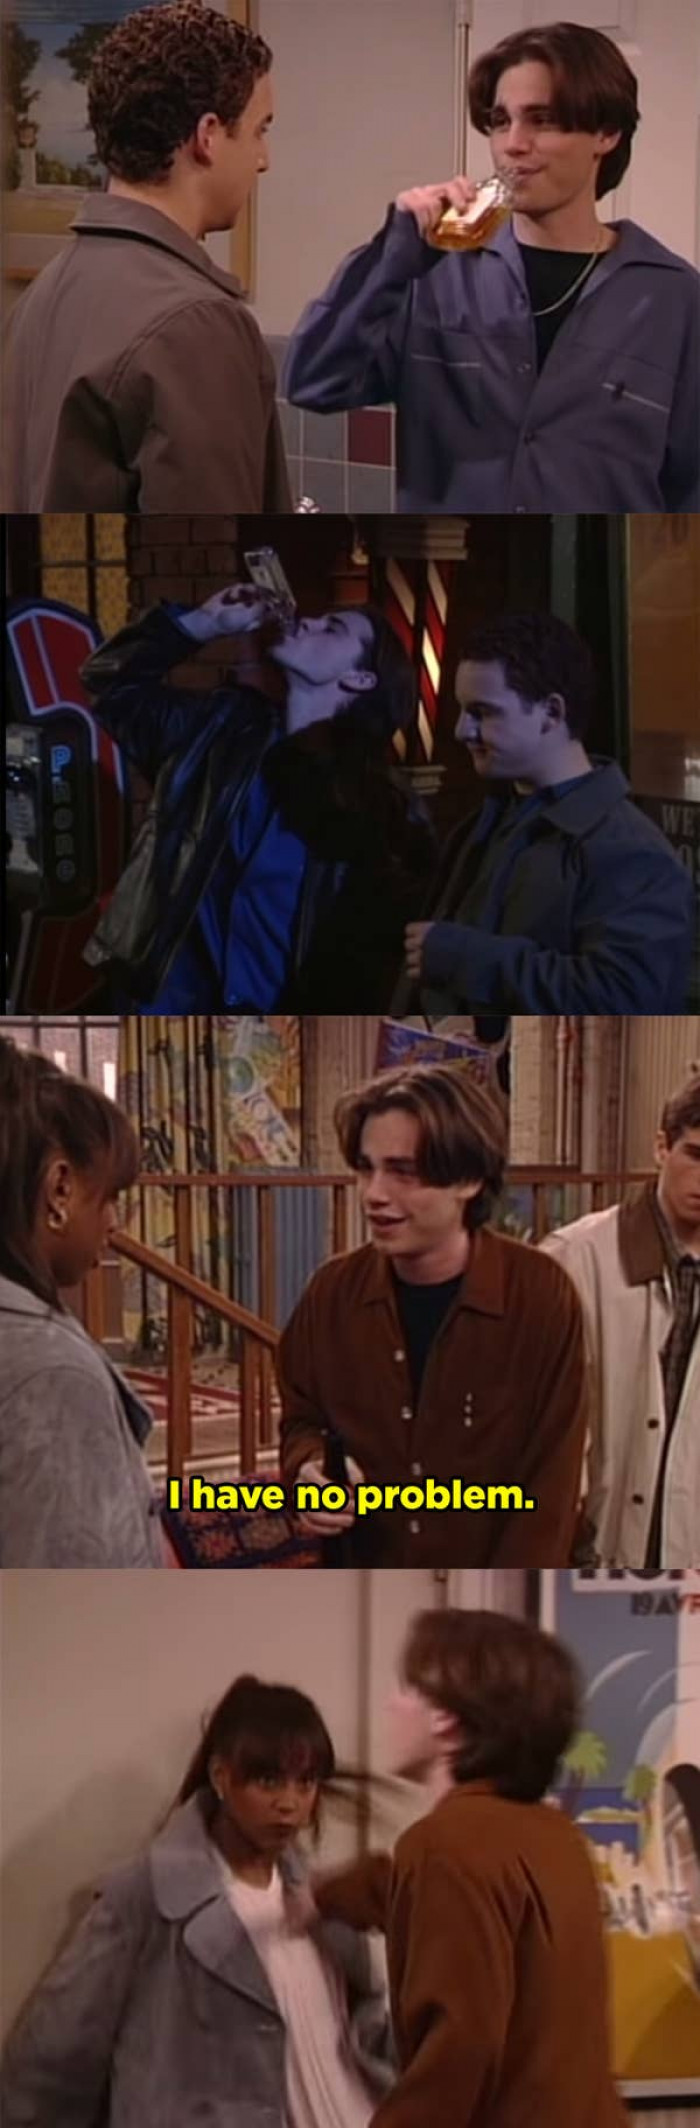 18. Boy Meets World: With no prior knowledge that alcoholism runs in his family, Shawn began drinking heavily and then pushed his girlfriend into a door.